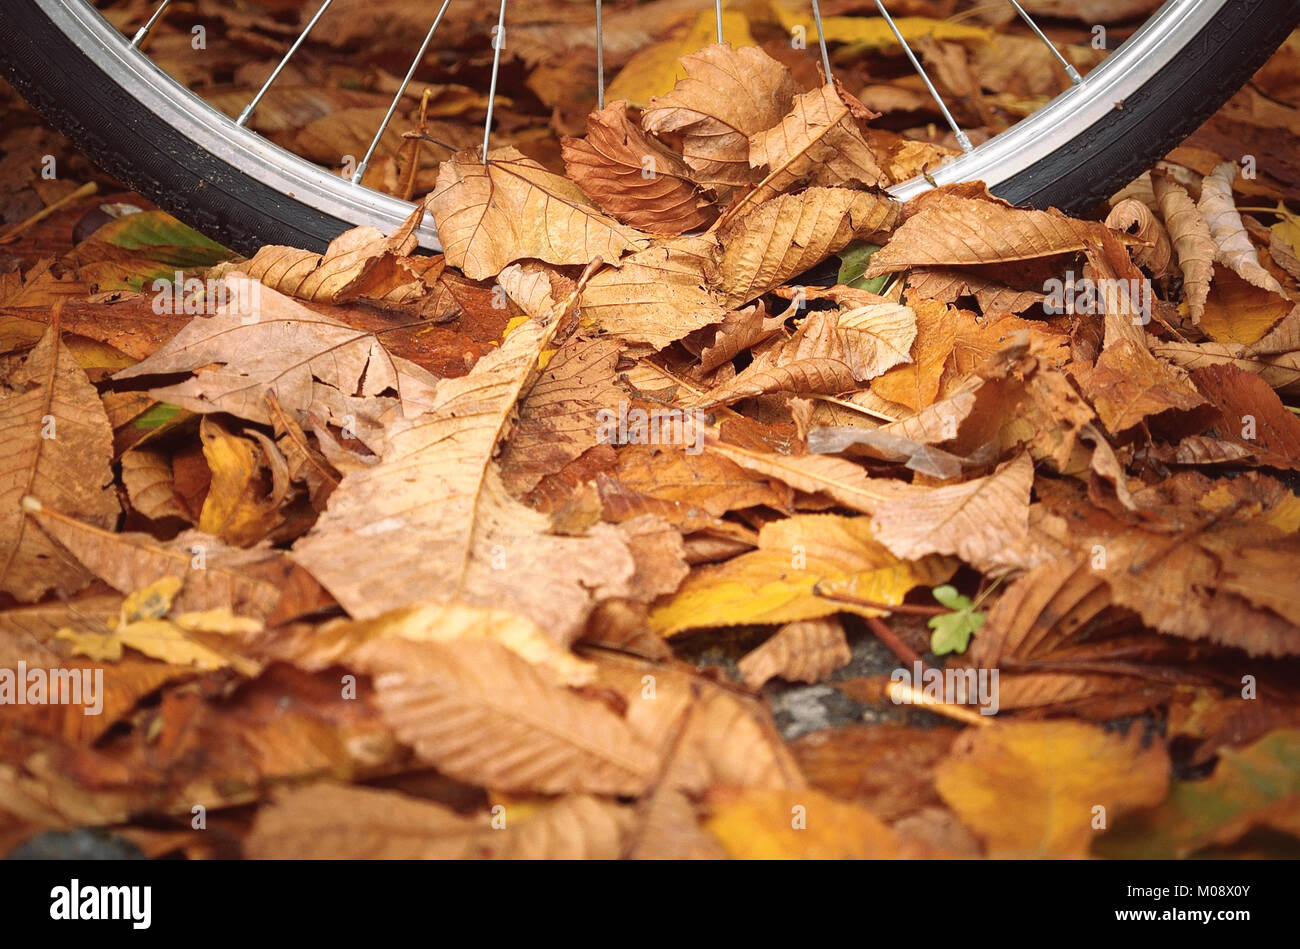 Fall season. Detail of a bicycle wheel partially covered with a pile of fallen leaves. Stock Photo